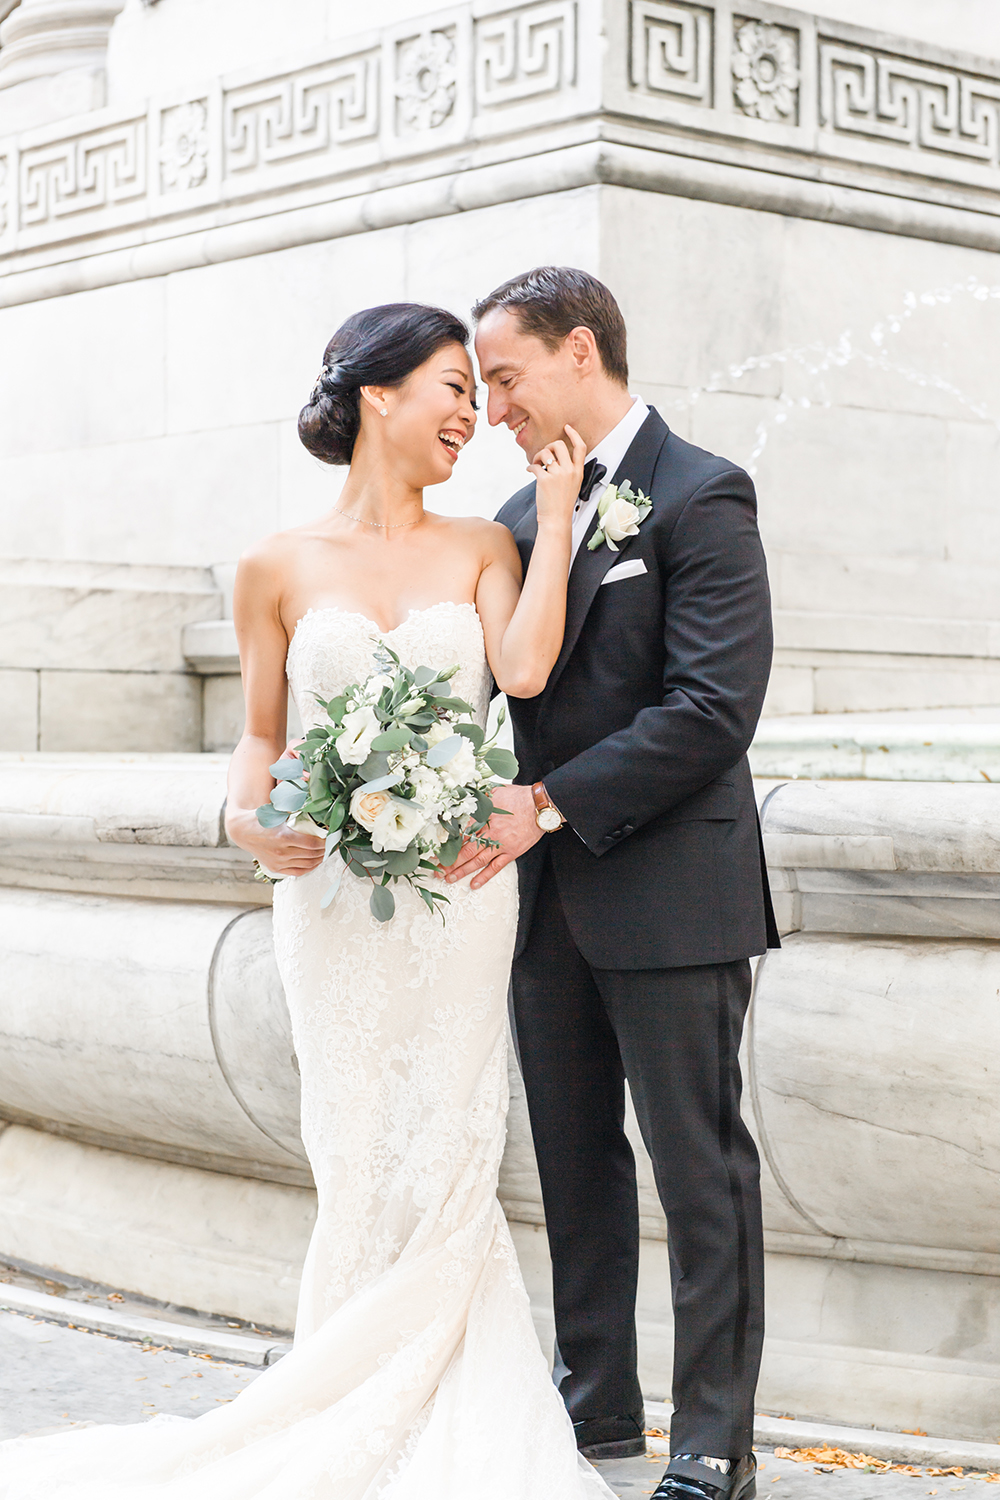 Wedding couple bride and groom photo session new york public library